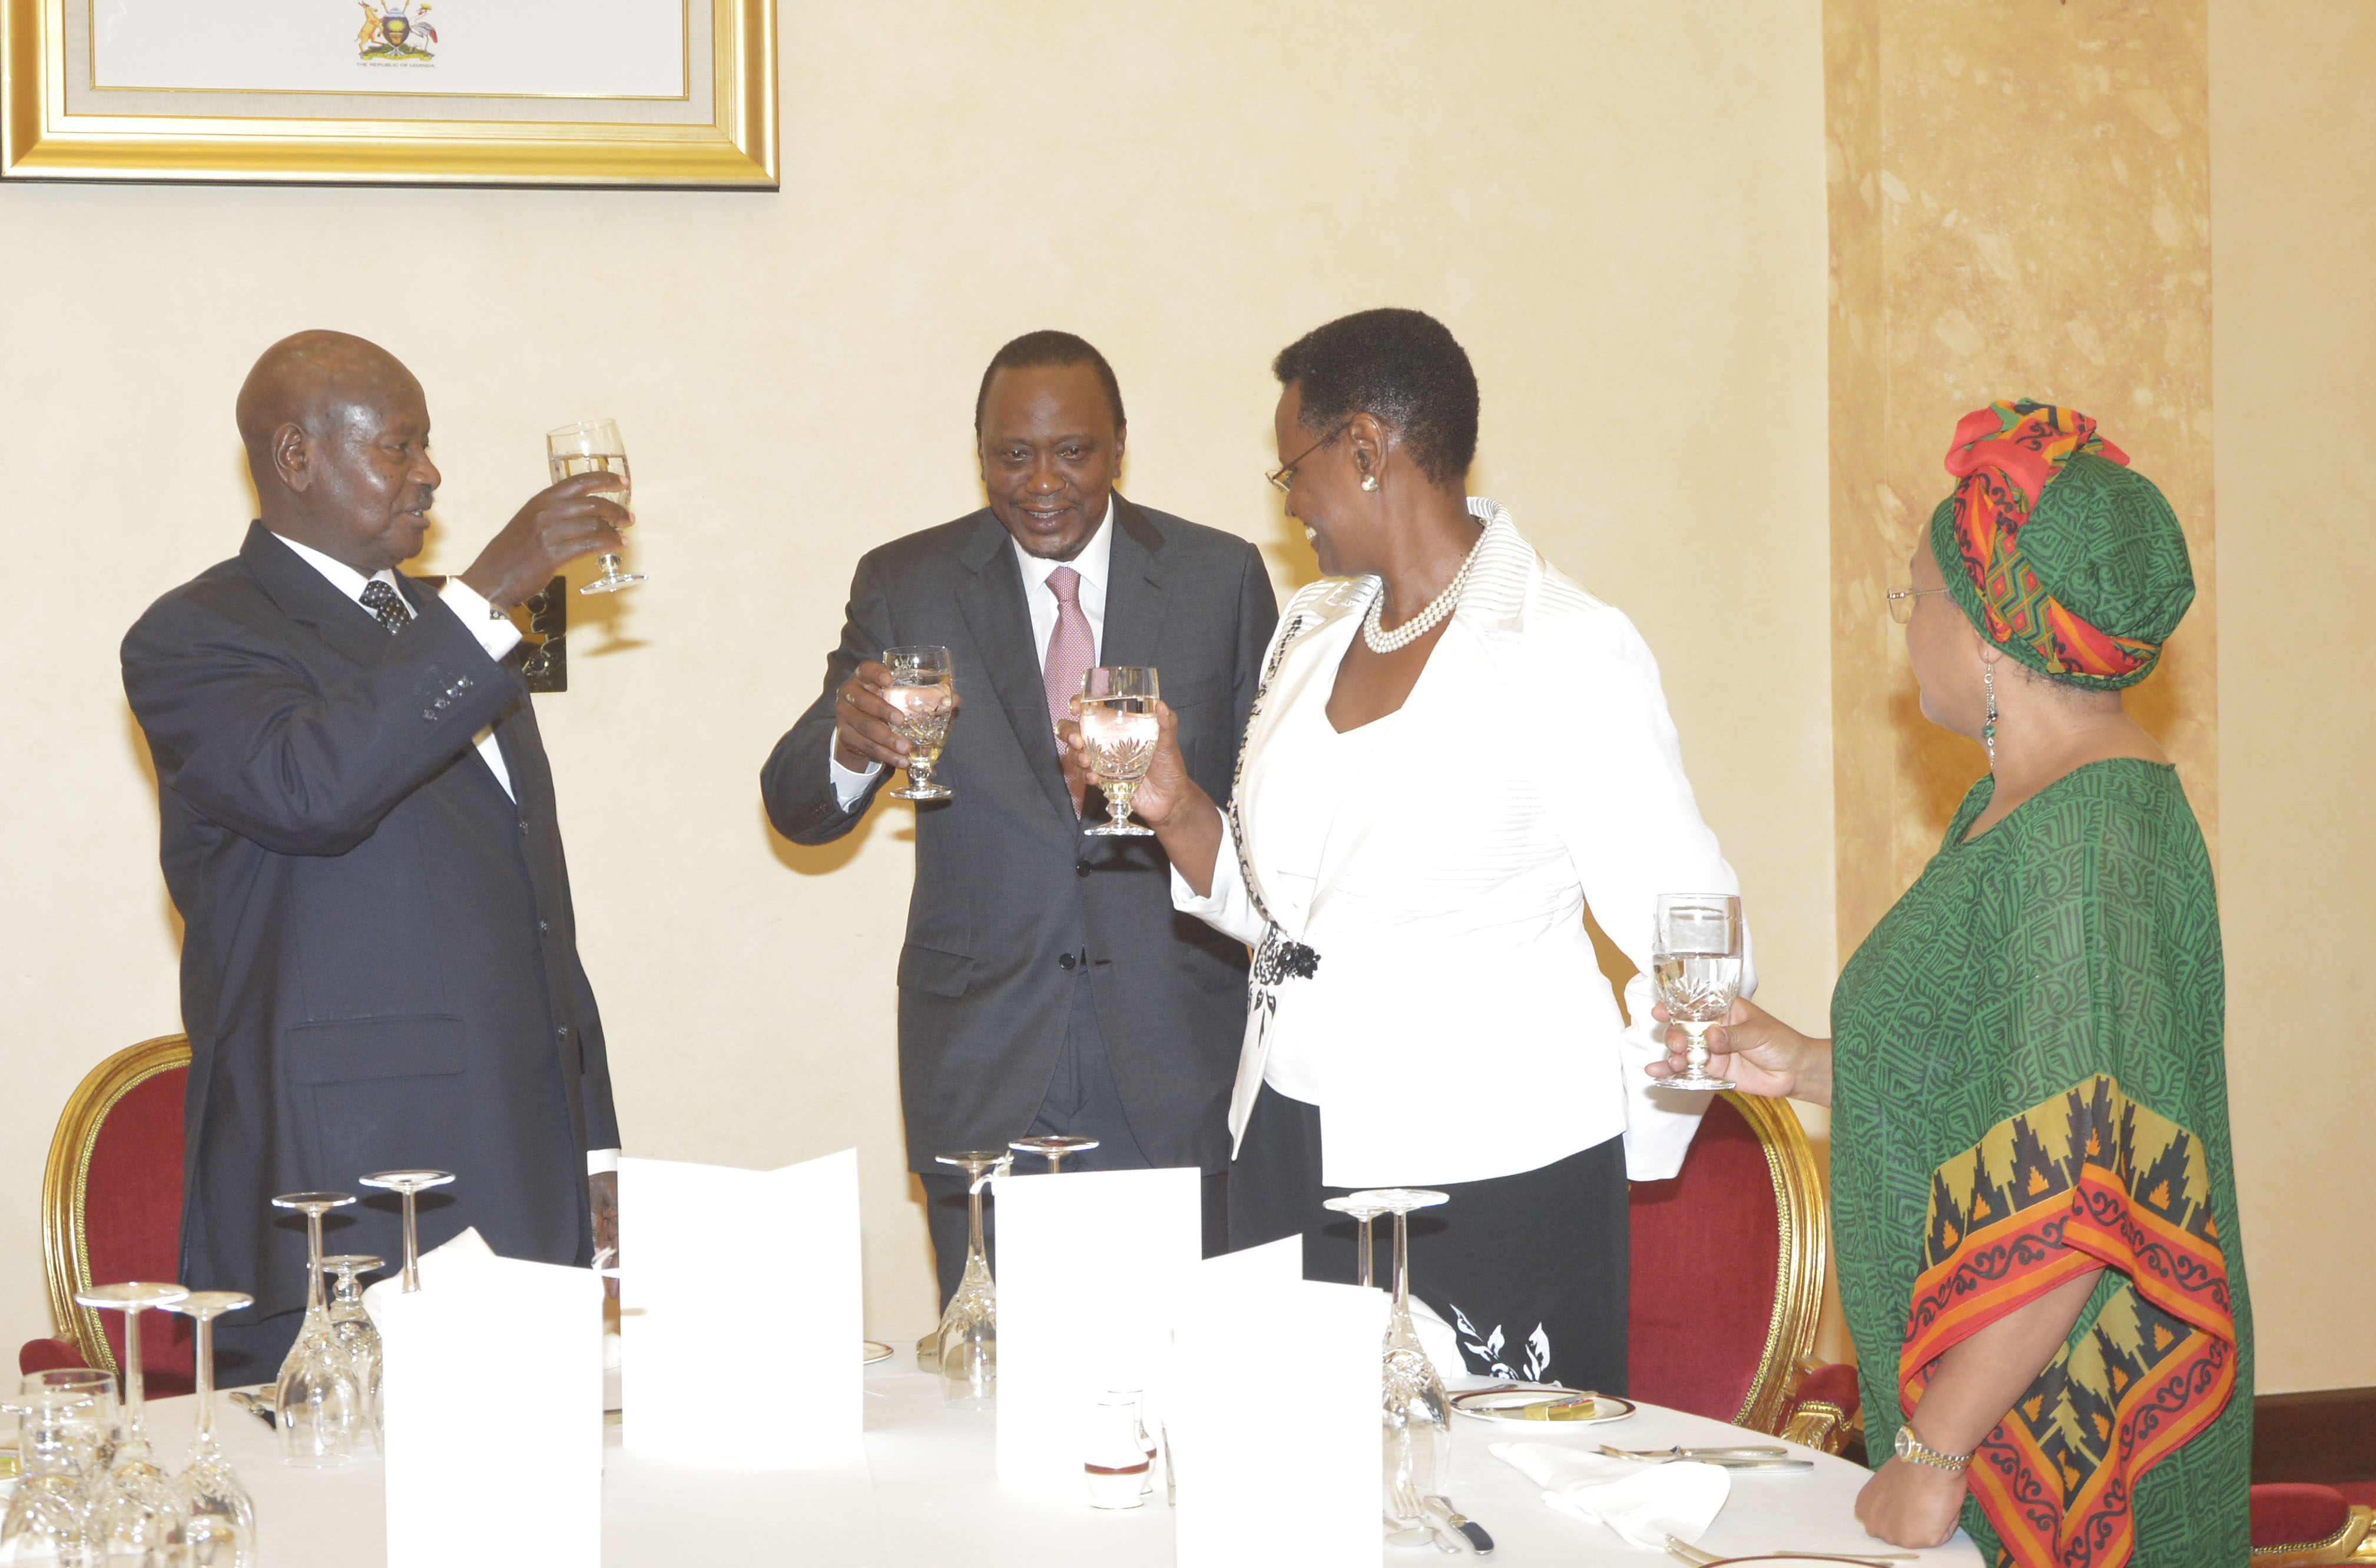 https://www.eagle.co.ug/wp-content/uploads/2015/08/President-Museveni-and-Uhuru-toast-to-the-lives-of-one-another-at-a-dinner.